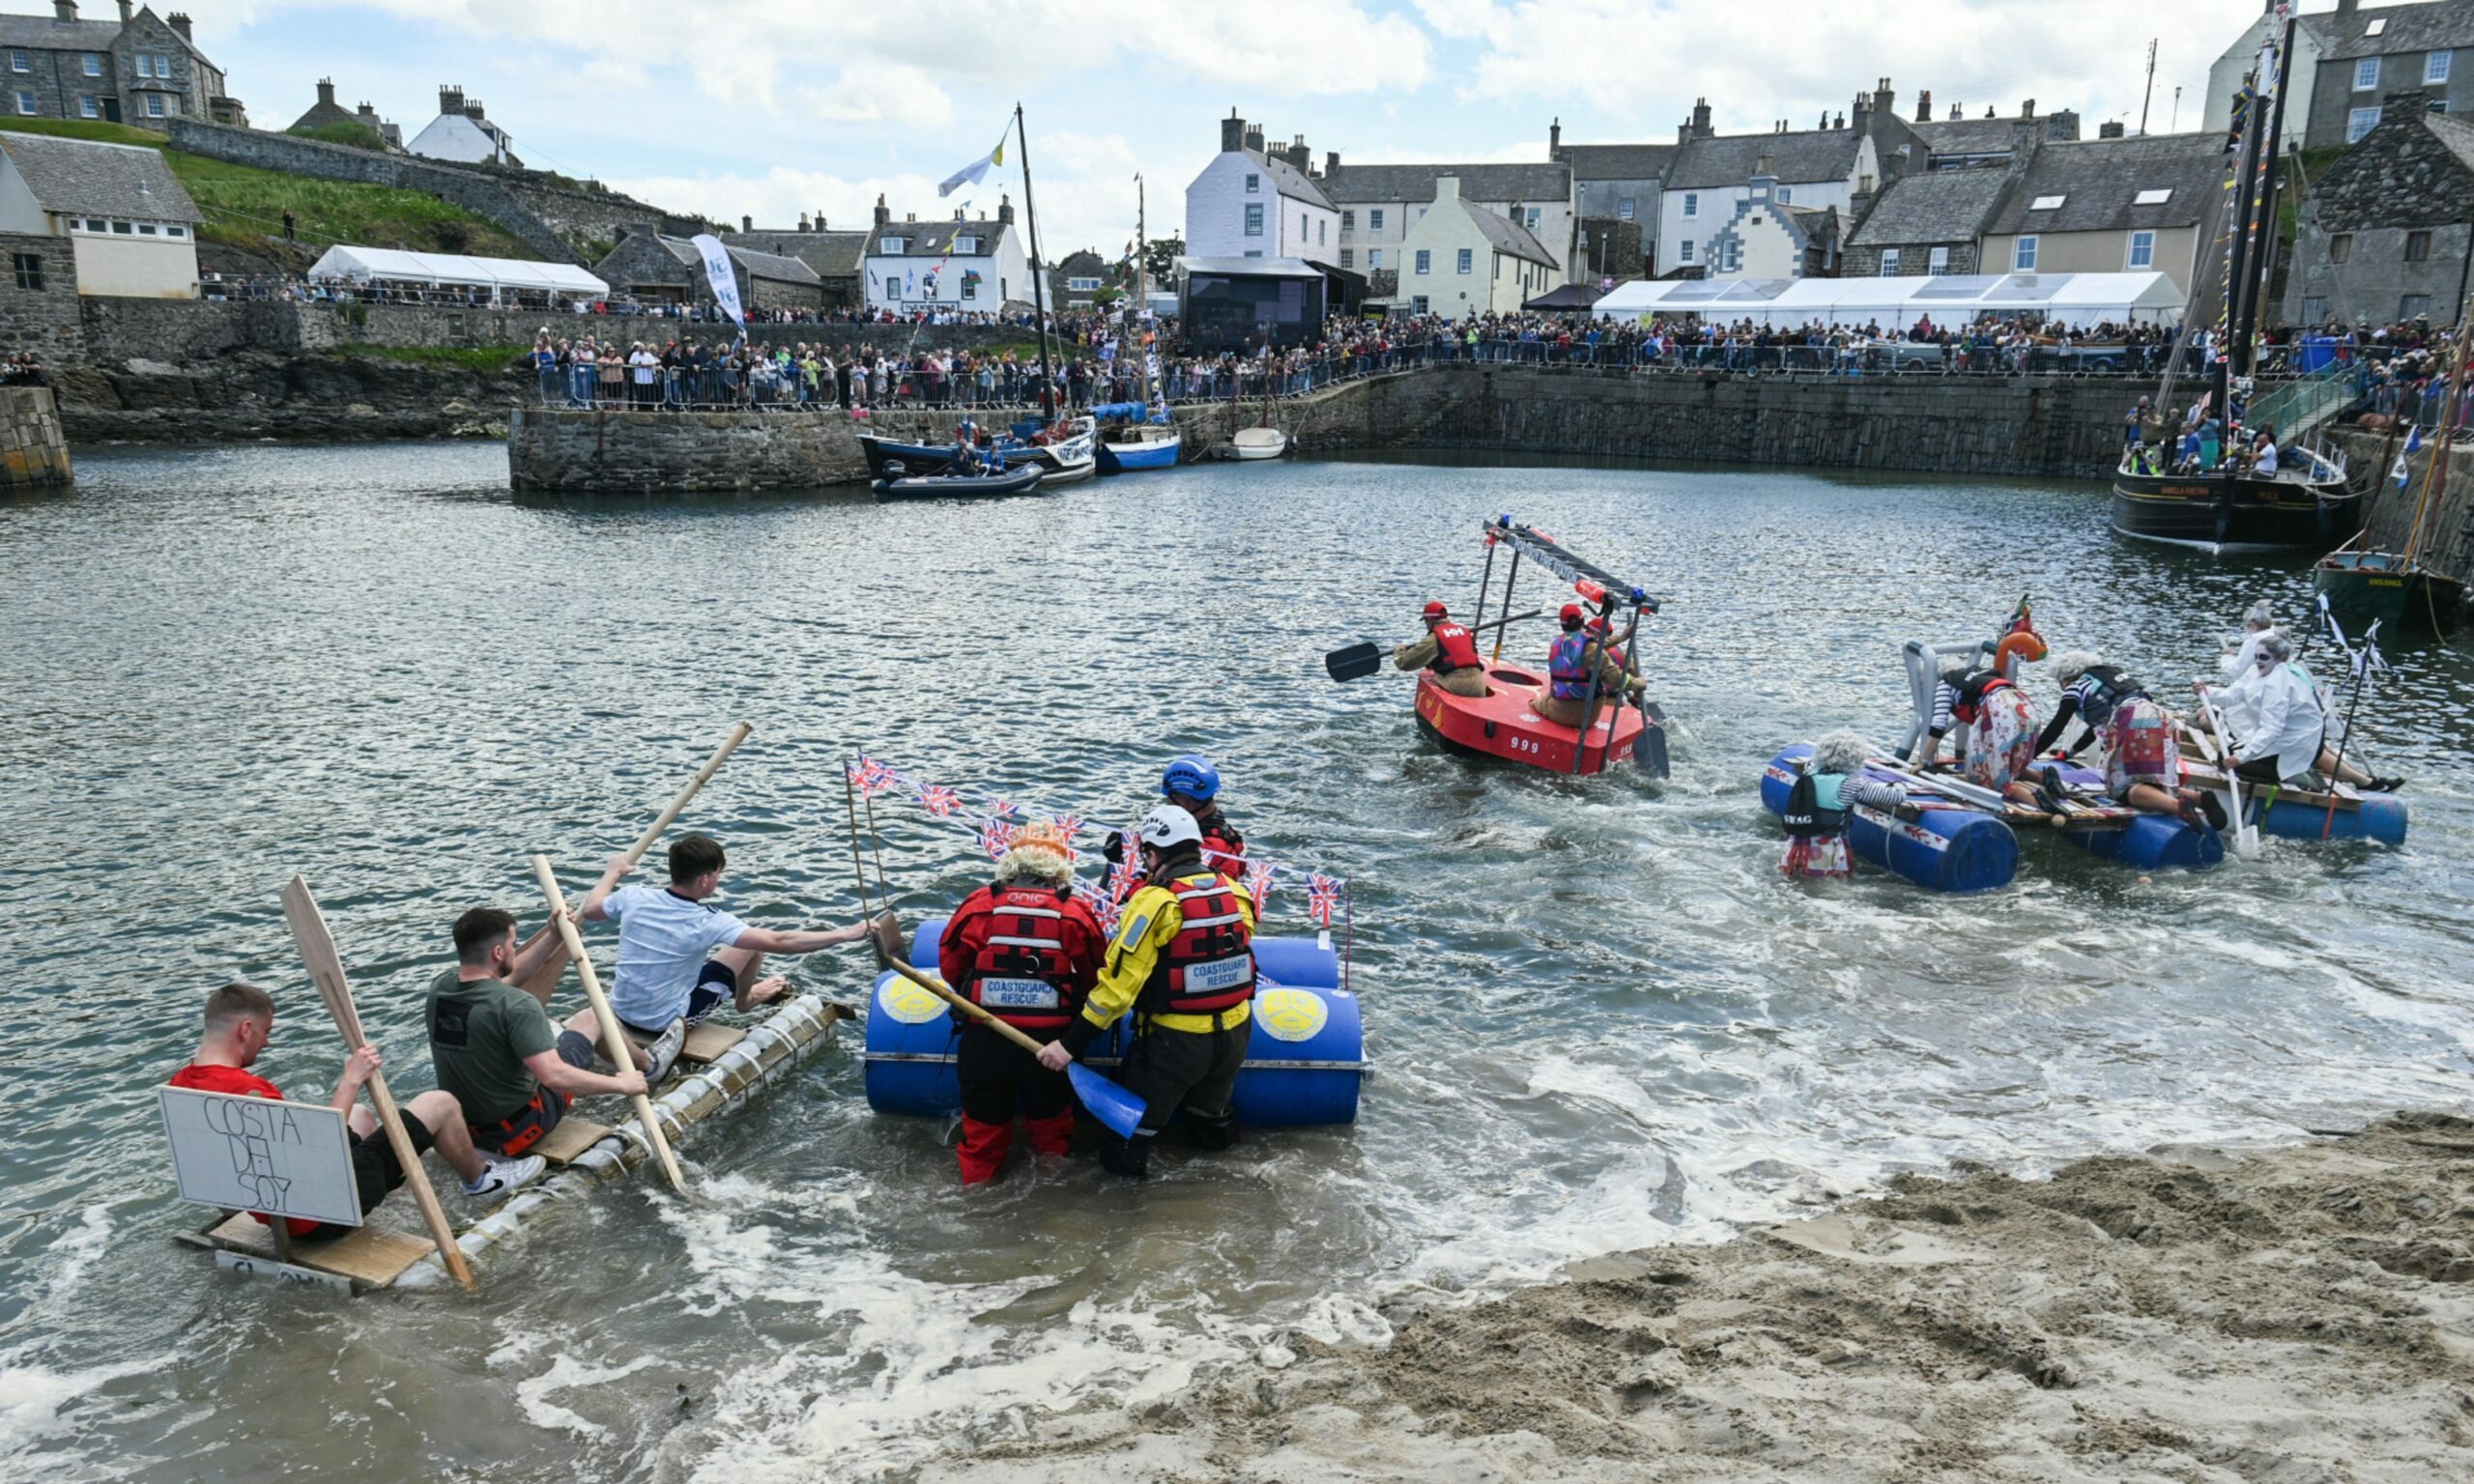 Rafters take part in the raft race at the festival. Picture by Jason Hedges/DC Thomson.